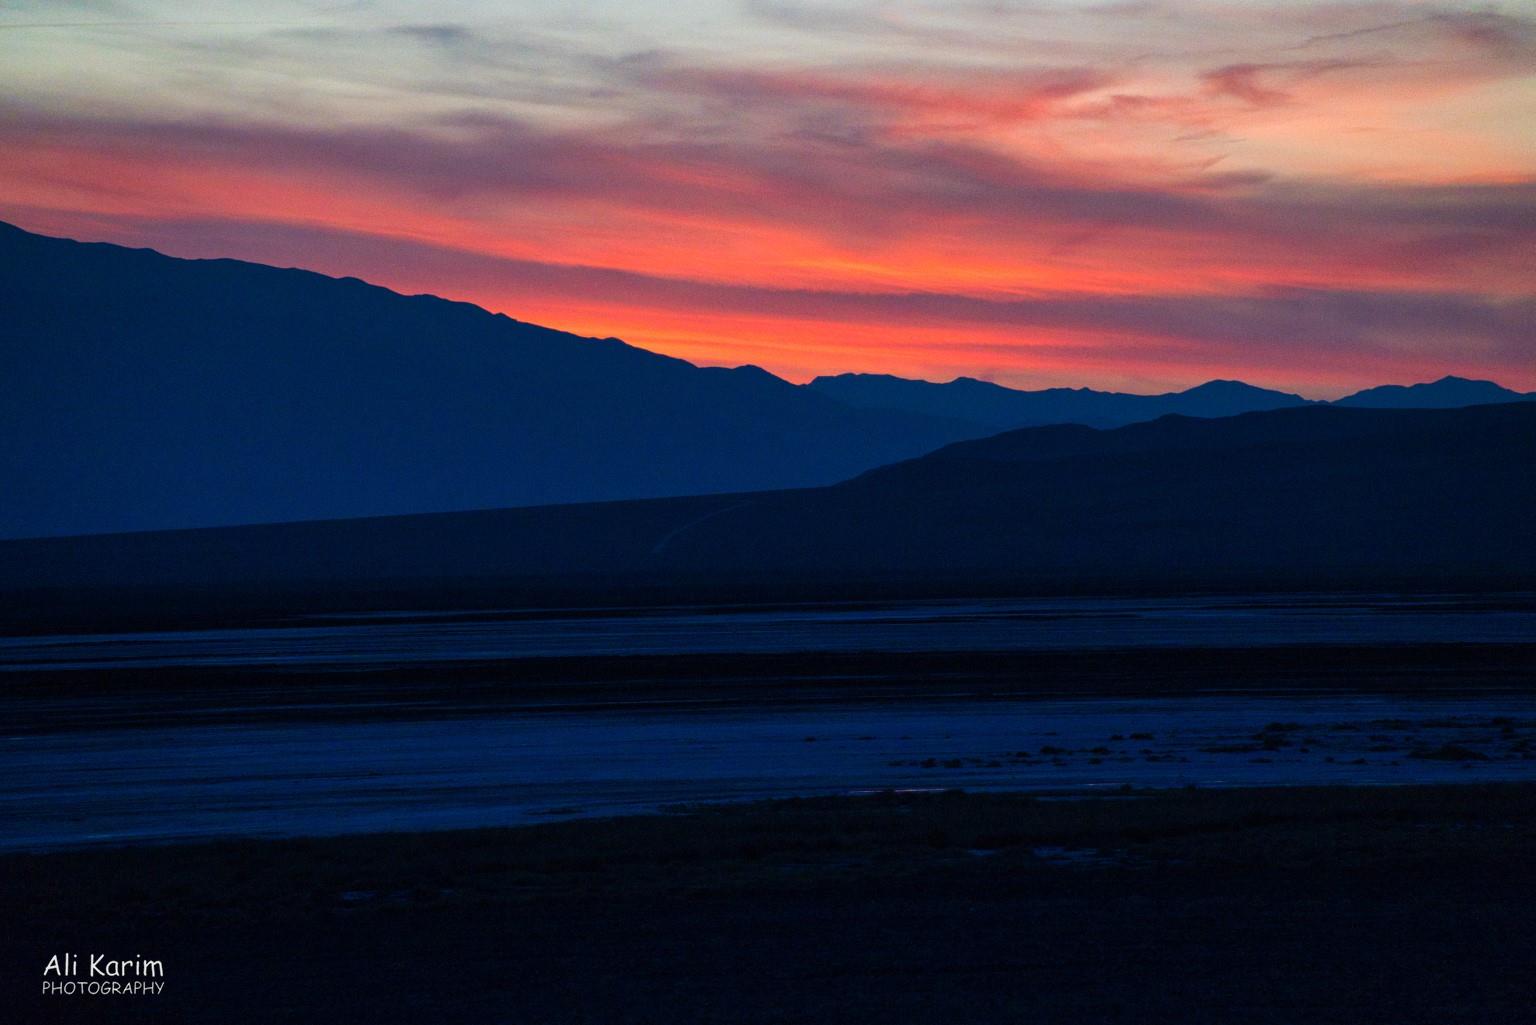 Death Valley National Park, June 2020, Beautiful Sunset in Death Valley